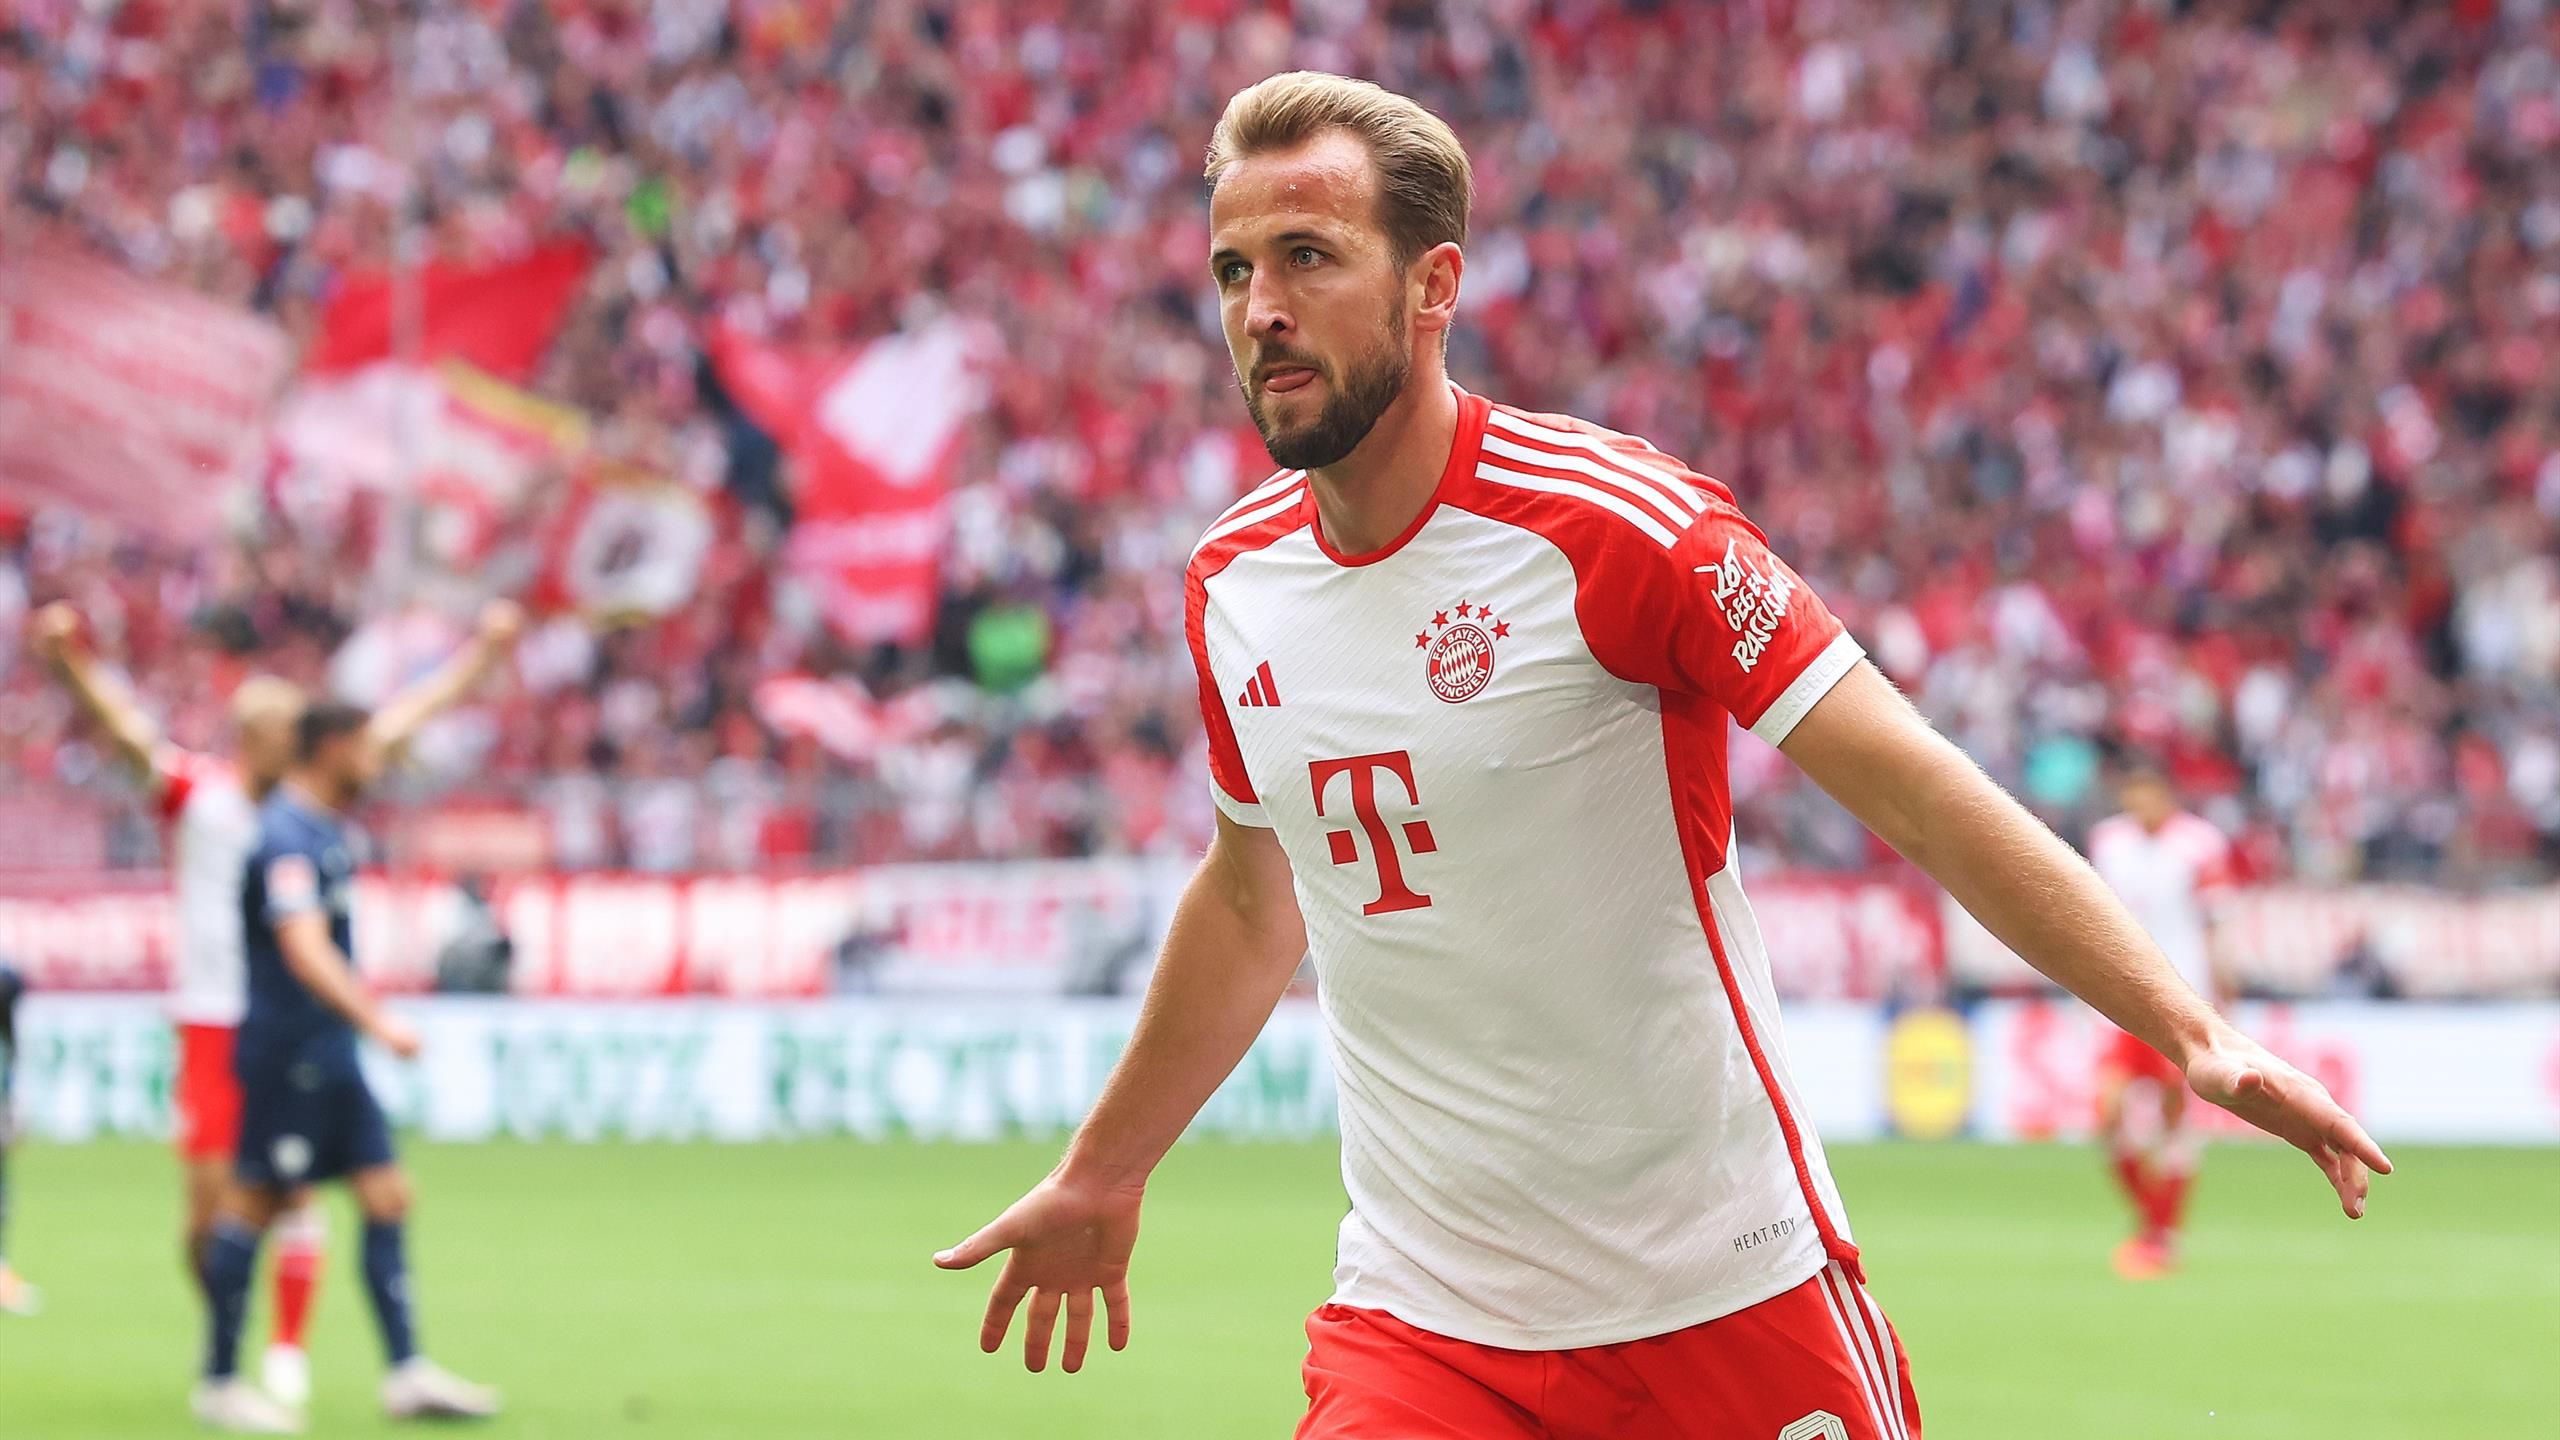 Harry Kane to wear number 9 for Bayern